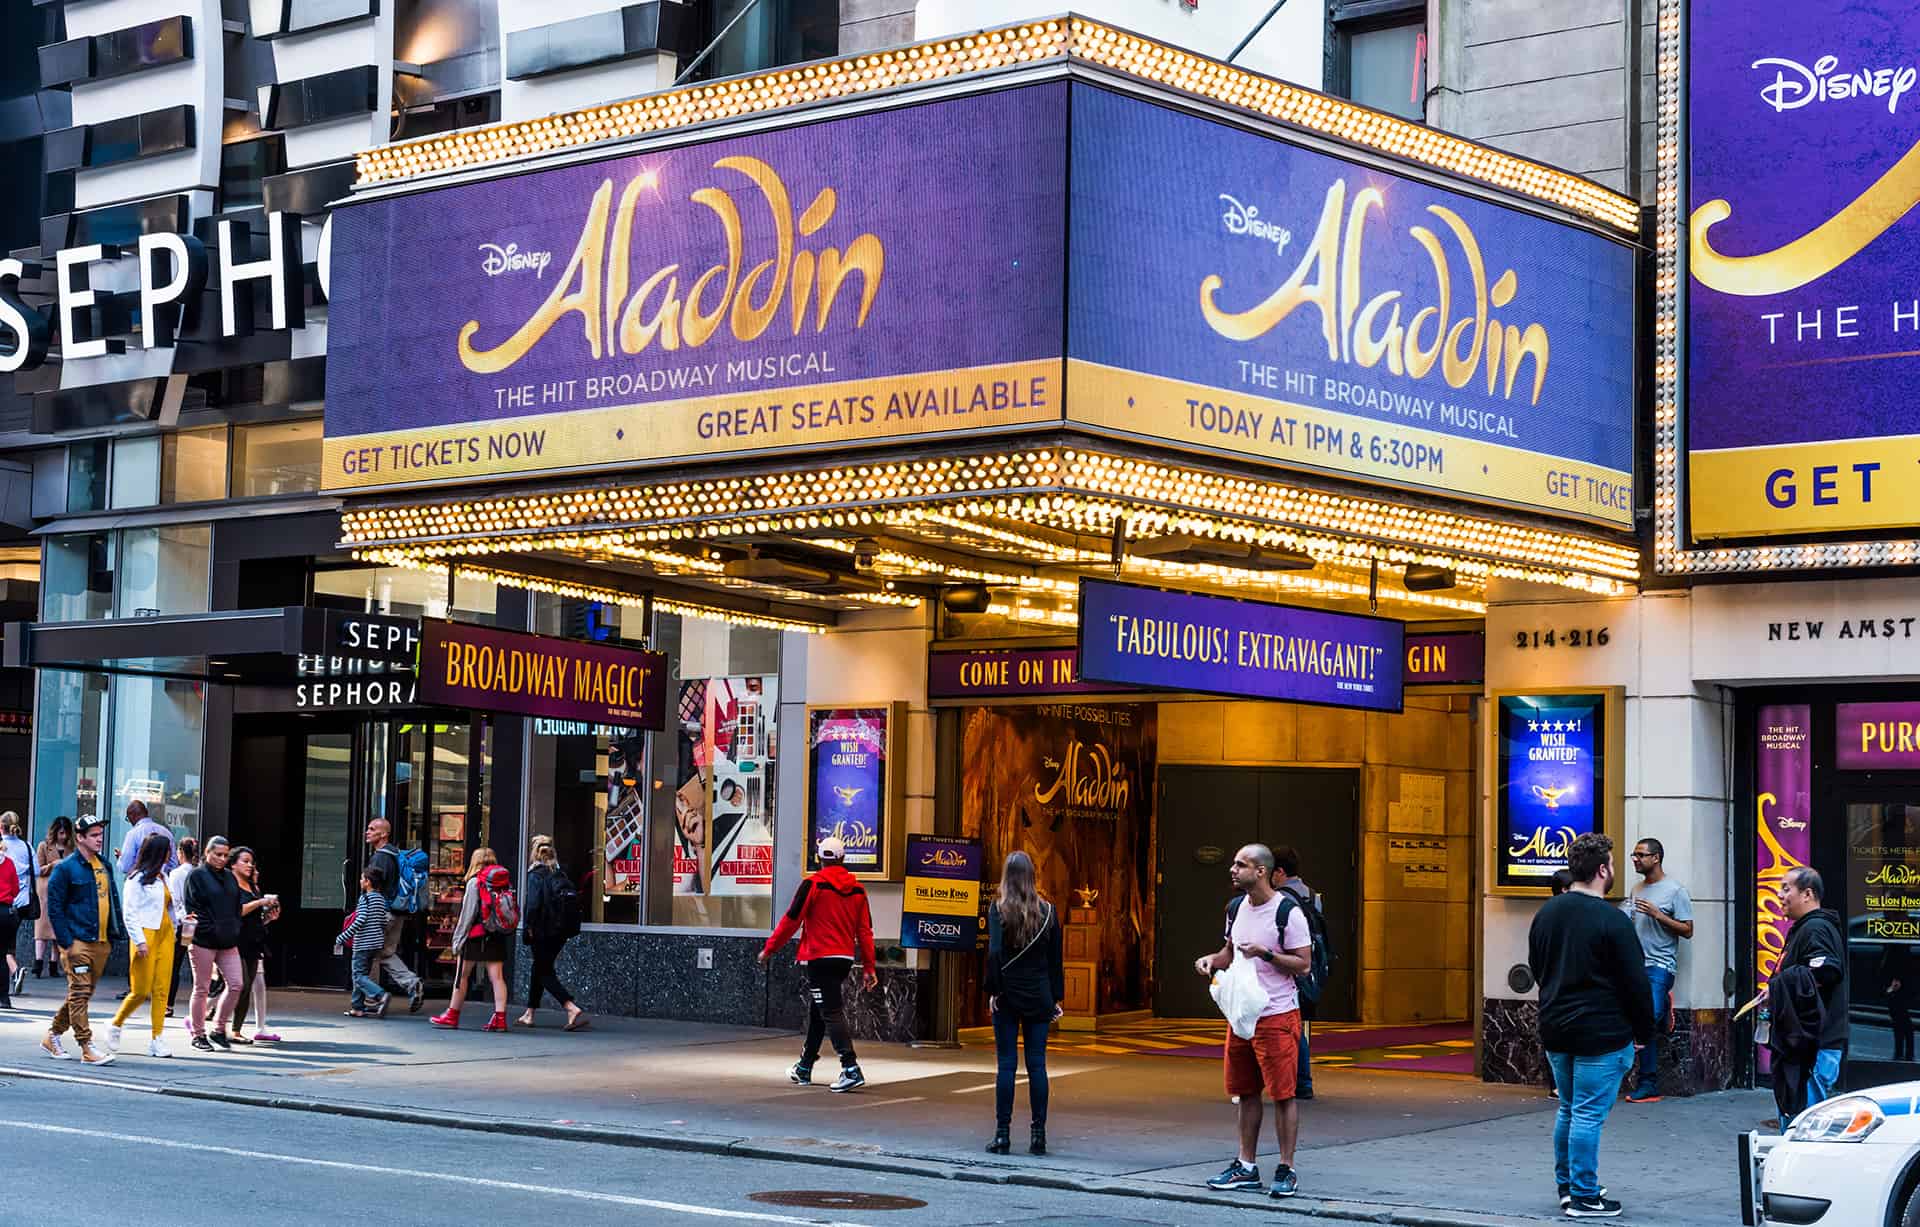 Aladdin on Broadway info, prices and tickets